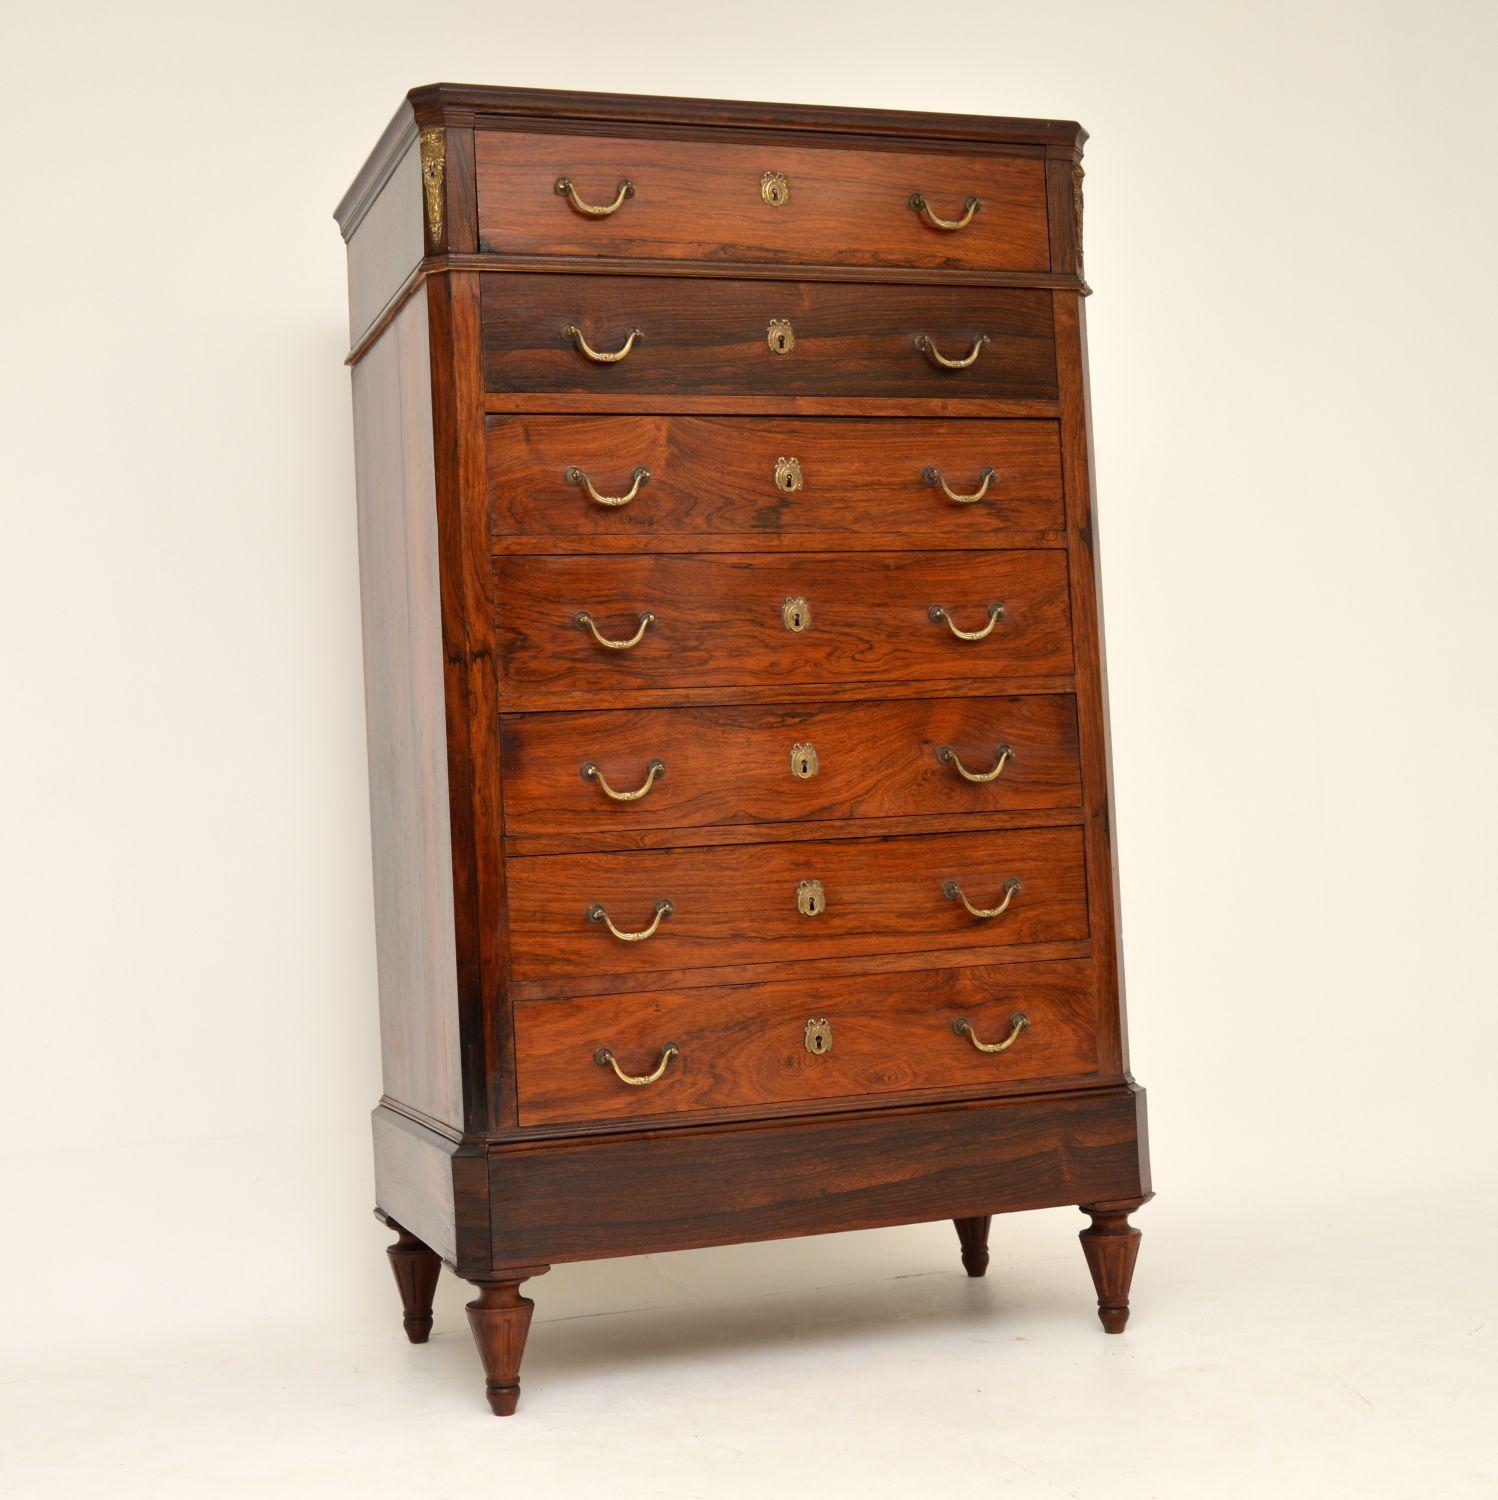 This antique Rosewood secretaire chest of drawers is extremely high quality and has nice slim proportions.

It’s either Swedish or Danish Biedermeier and dates from circa 1800s-1820s period.

The grain and pattern of the rosewood is fabulous and